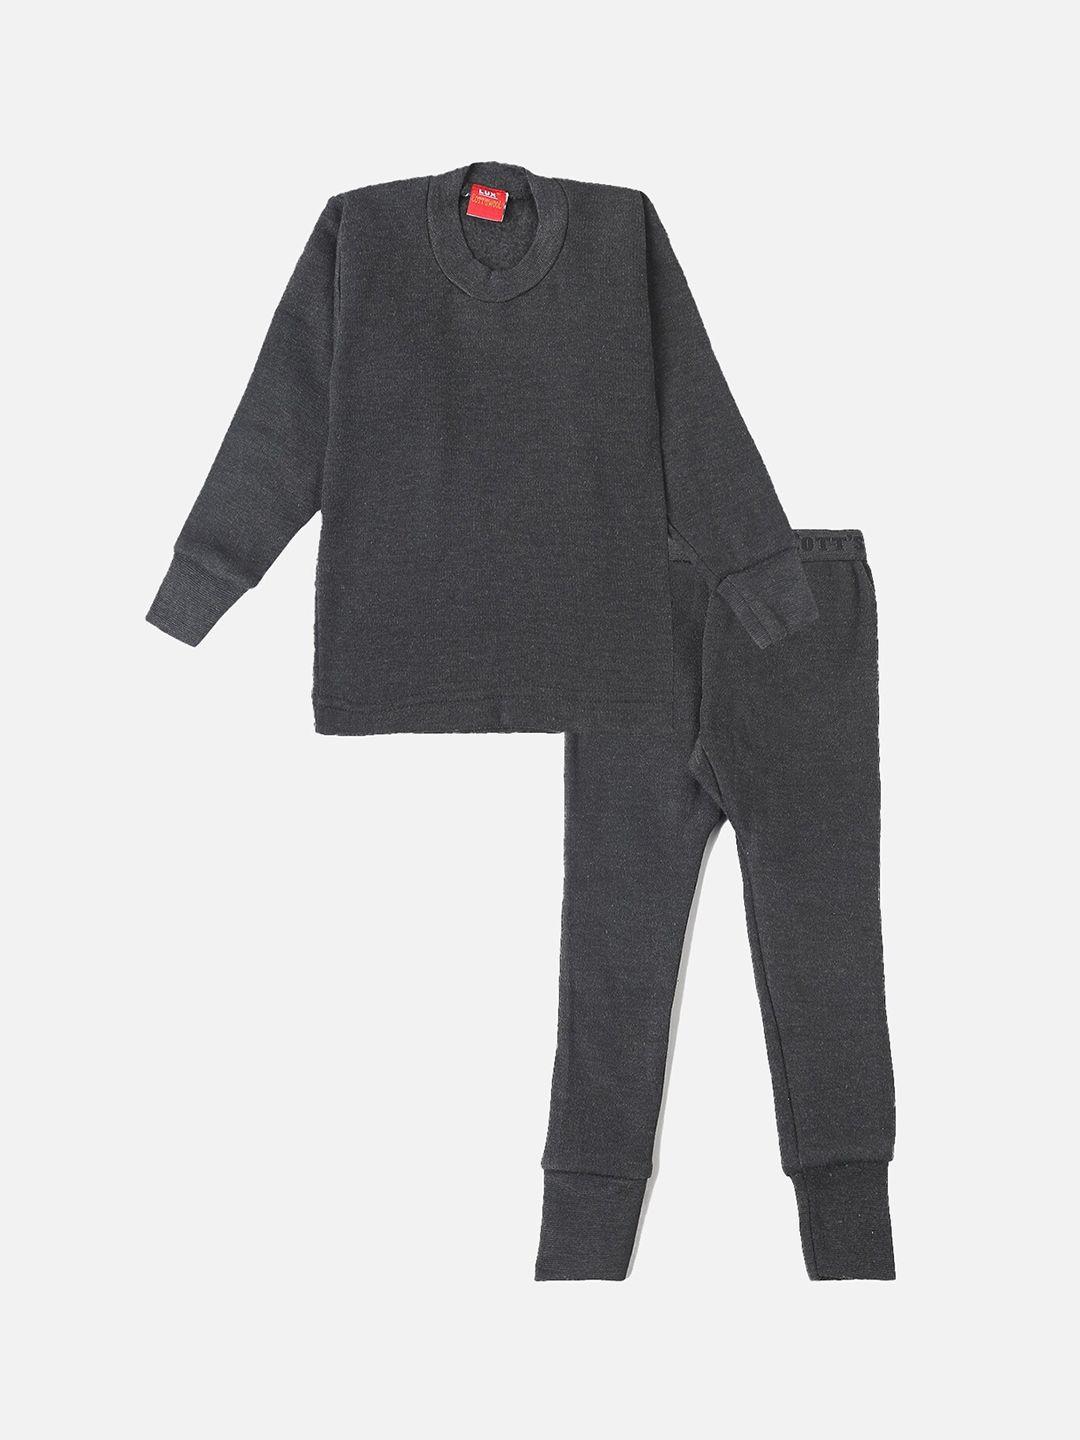 Lux Cottswool Boys Charcoal Grey Solid Knitted Cotton Slim-Fit Thermal Set